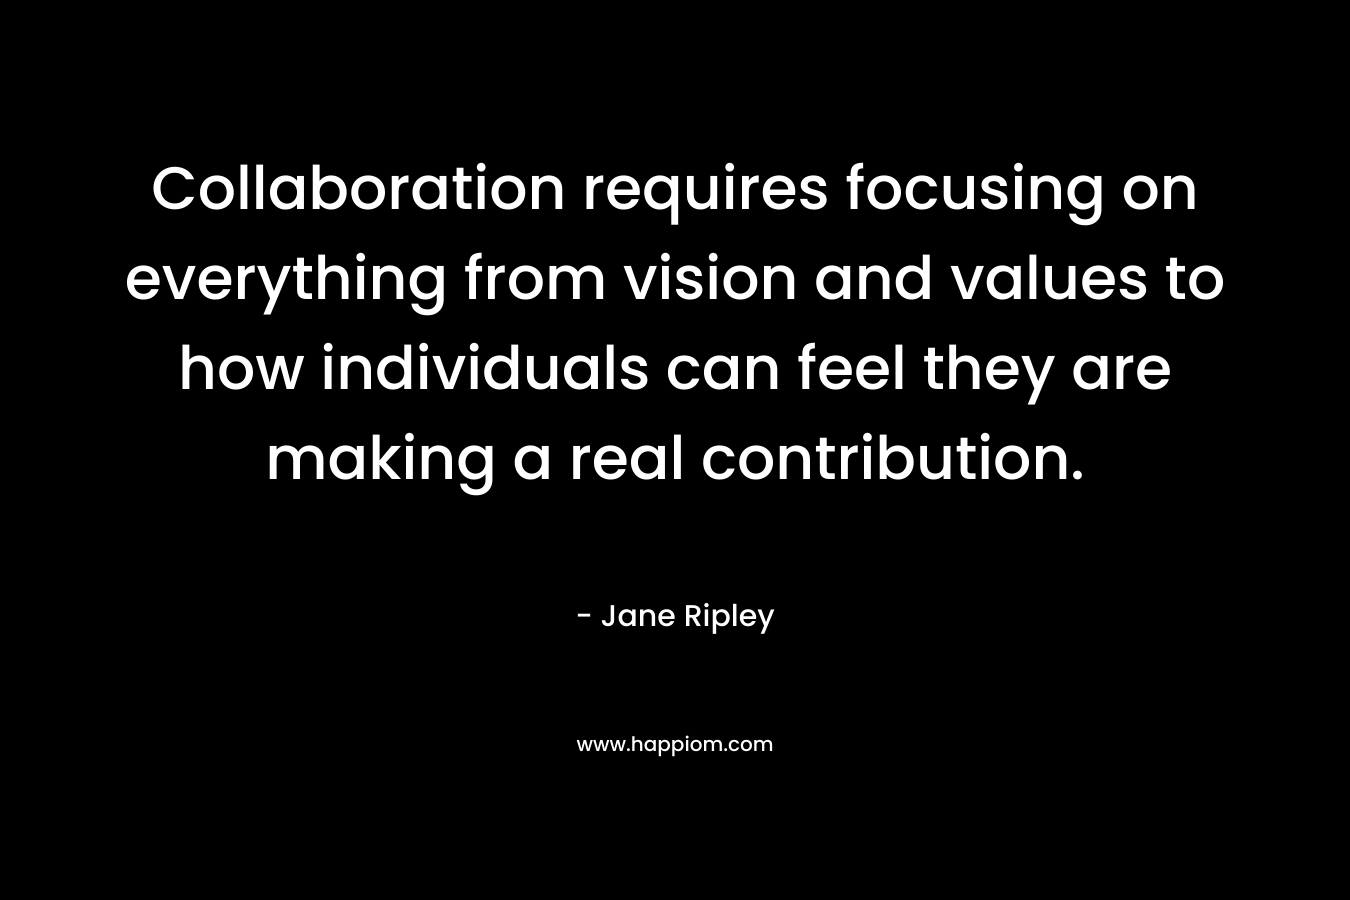 Collaboration requires focusing on everything from vision and values to how individuals can feel they are making a real contribution. – Jane Ripley